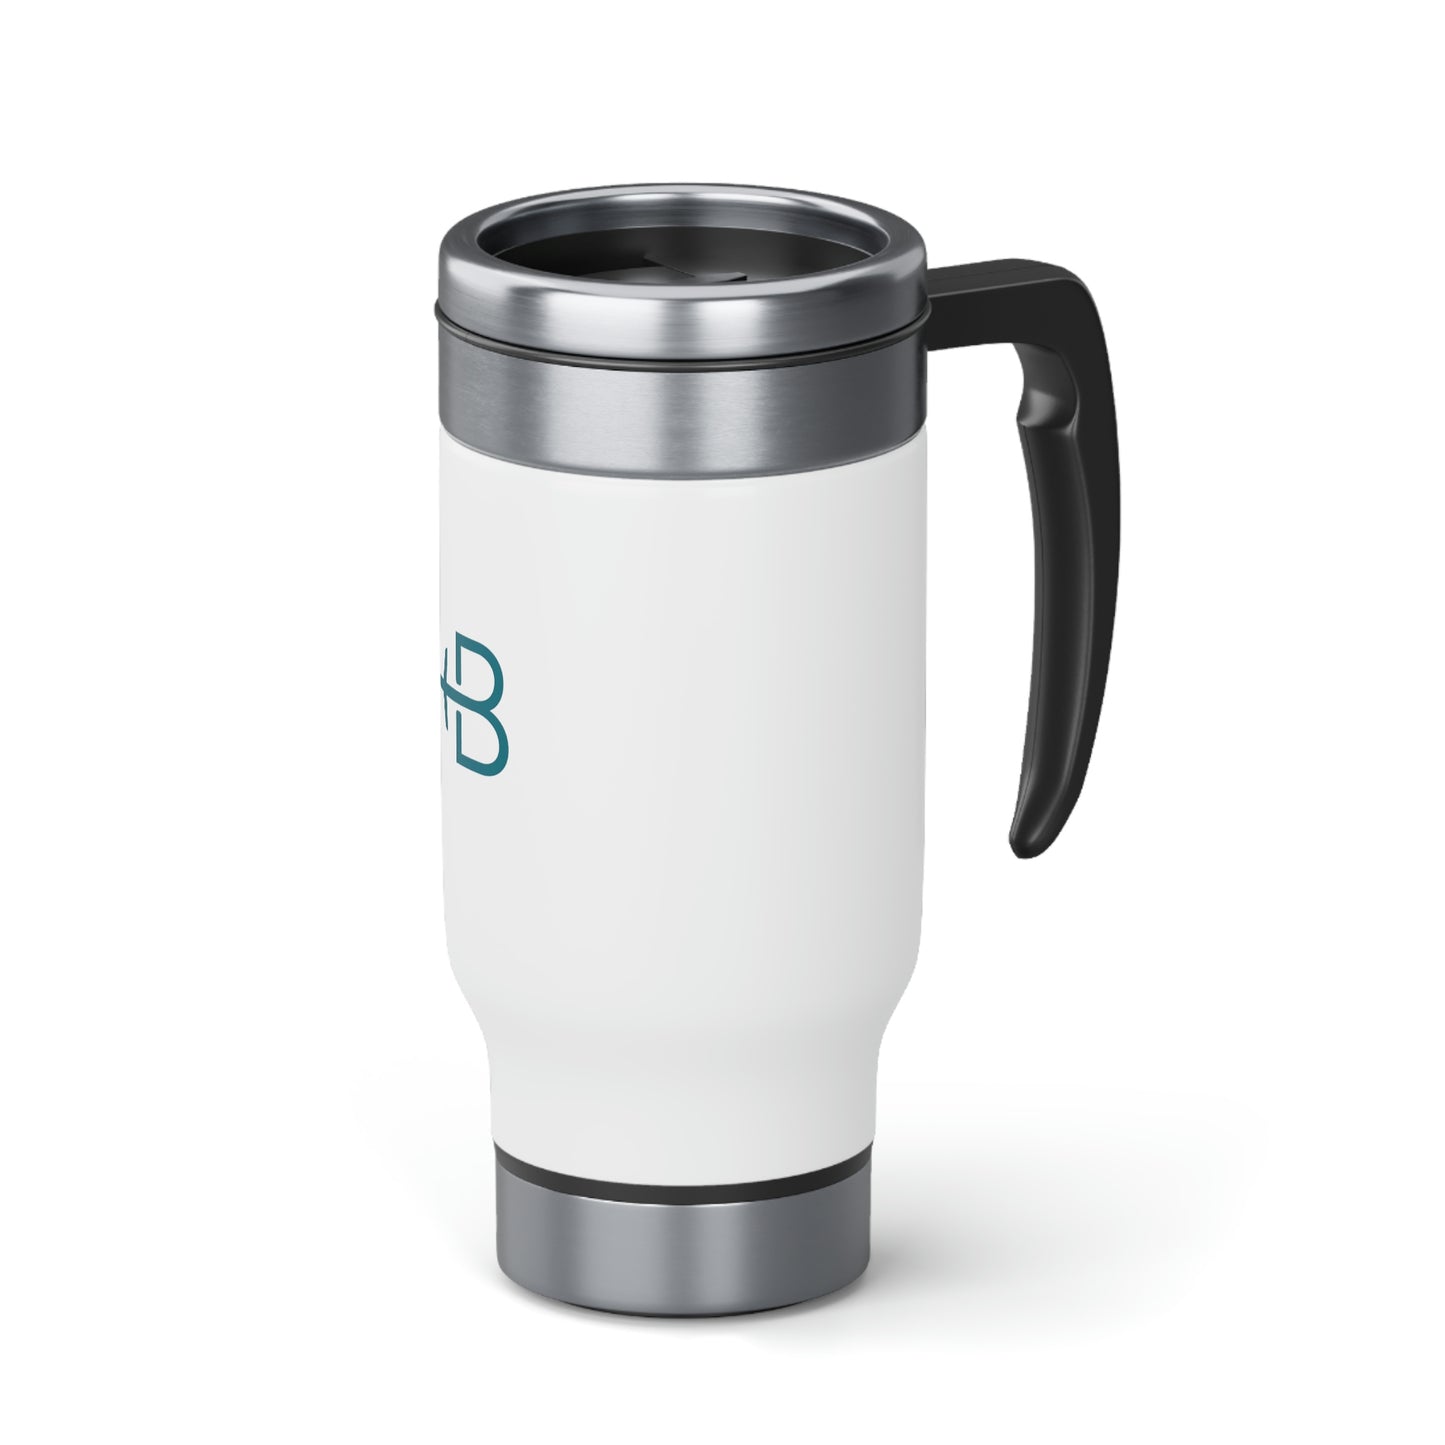 Bright Trip: Stainless Steel Travel Mug with Handle, 14oz